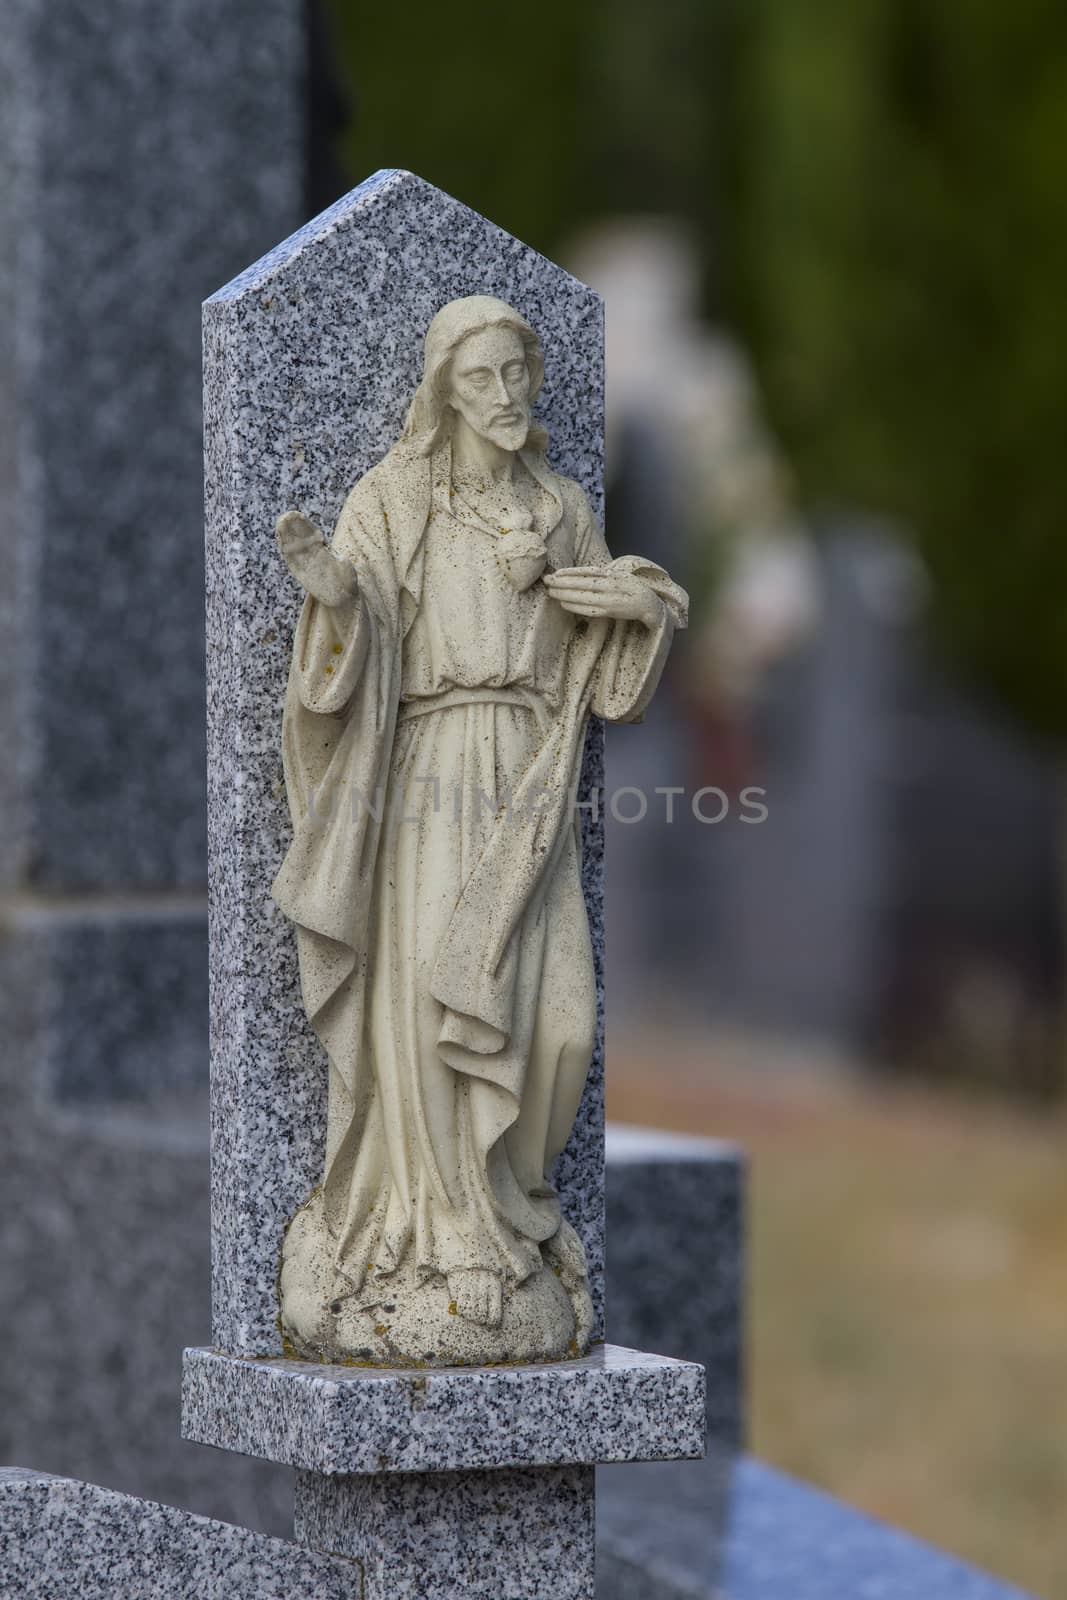 Cemetery detail with stone sculpture by FernandoCortes